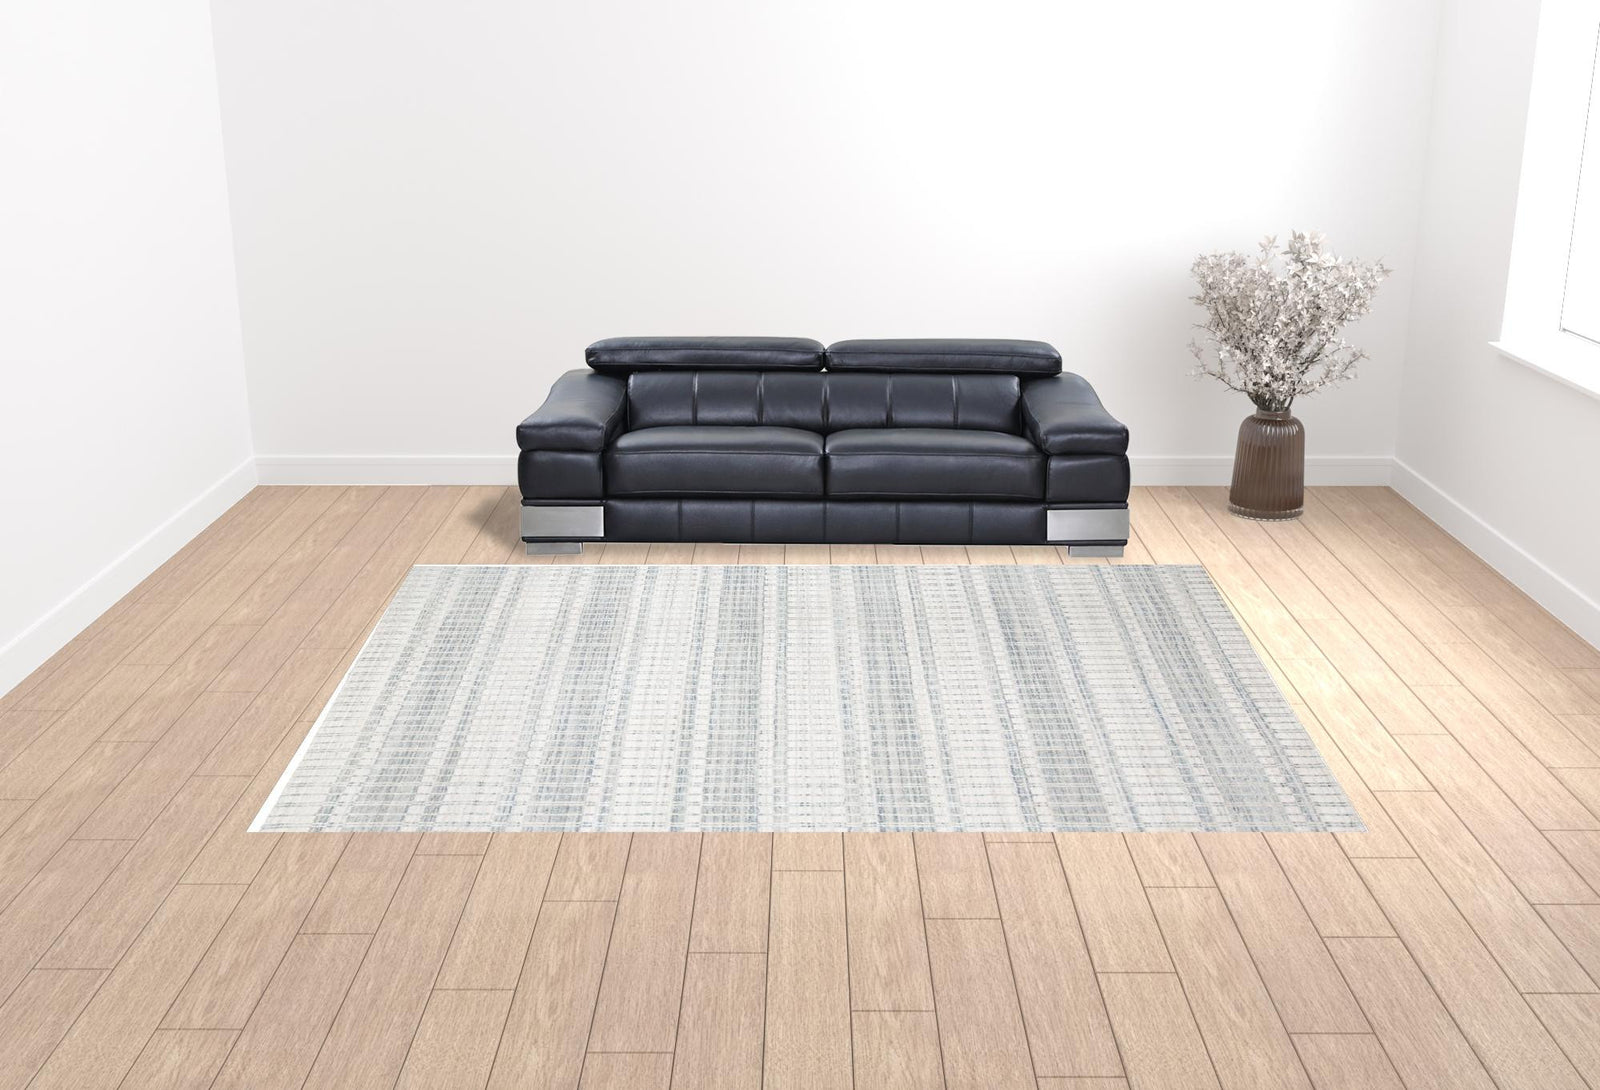 4' X 6' Blue Gray And Ivory Striped Hand Woven Area Rug